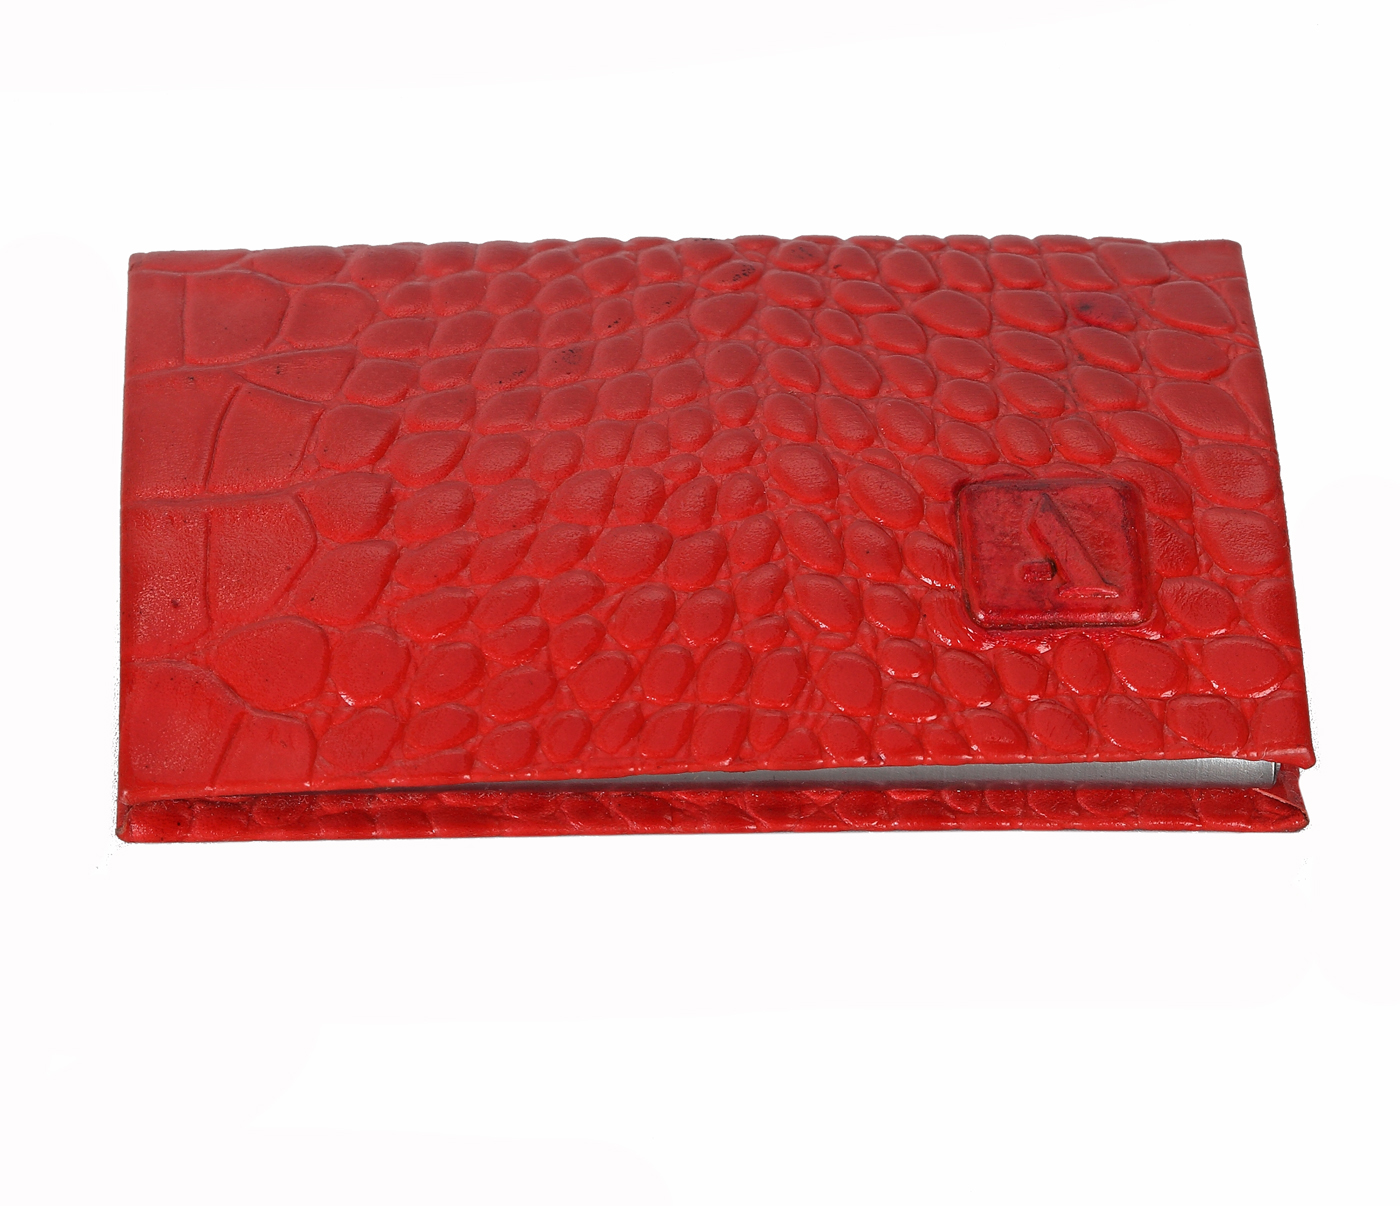 W170--Metal Body Credit, Visting Card Case Bounded In Genuine Leather - Red